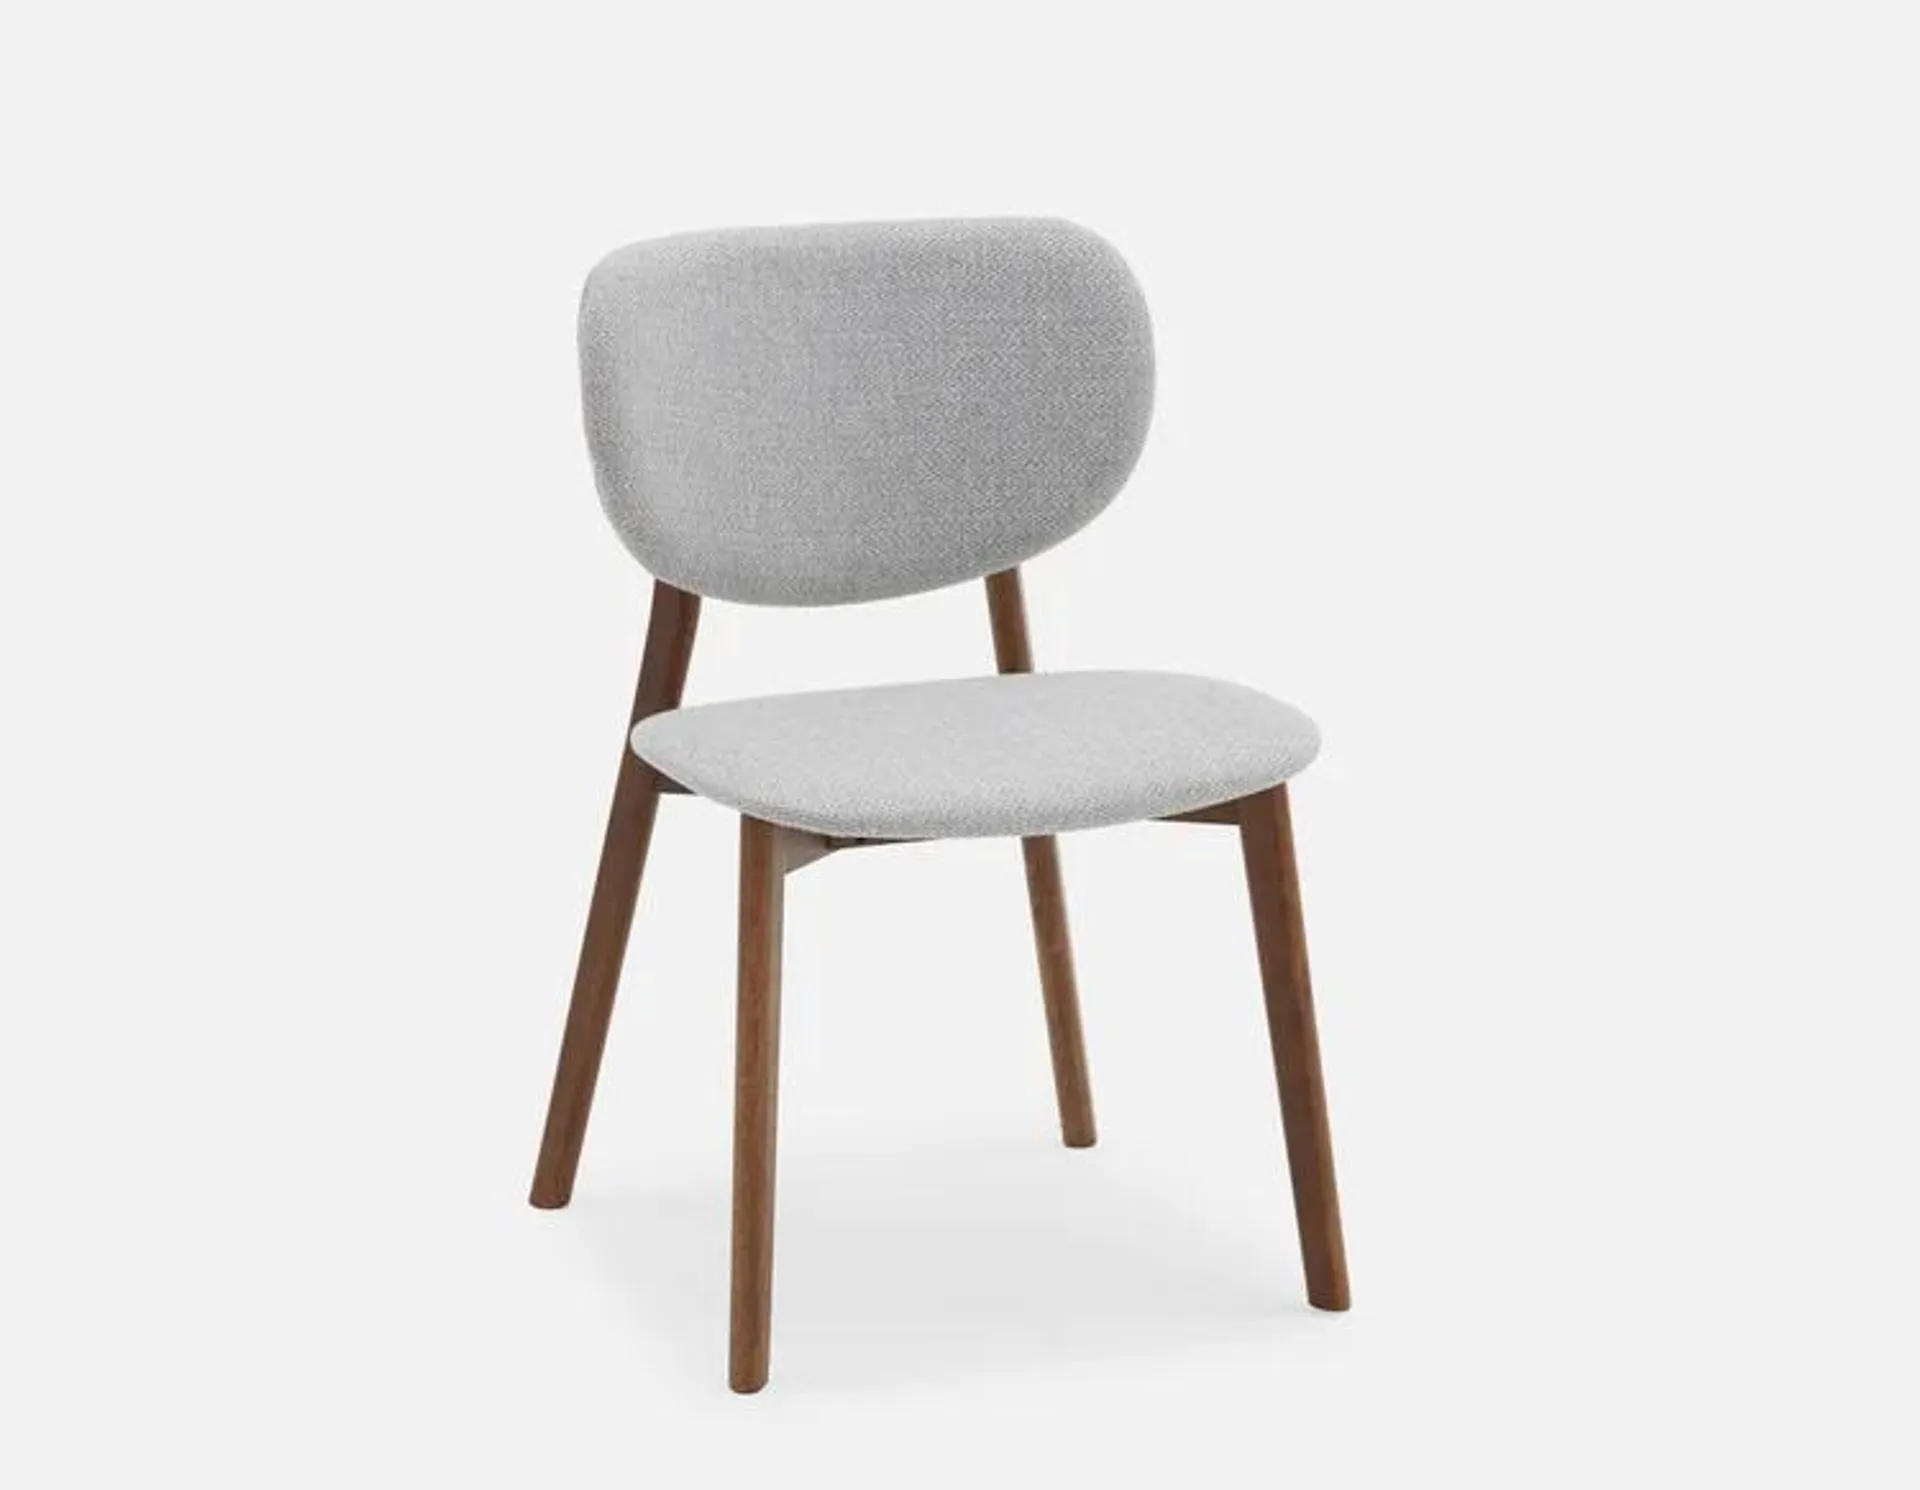 ODENSE dining chair